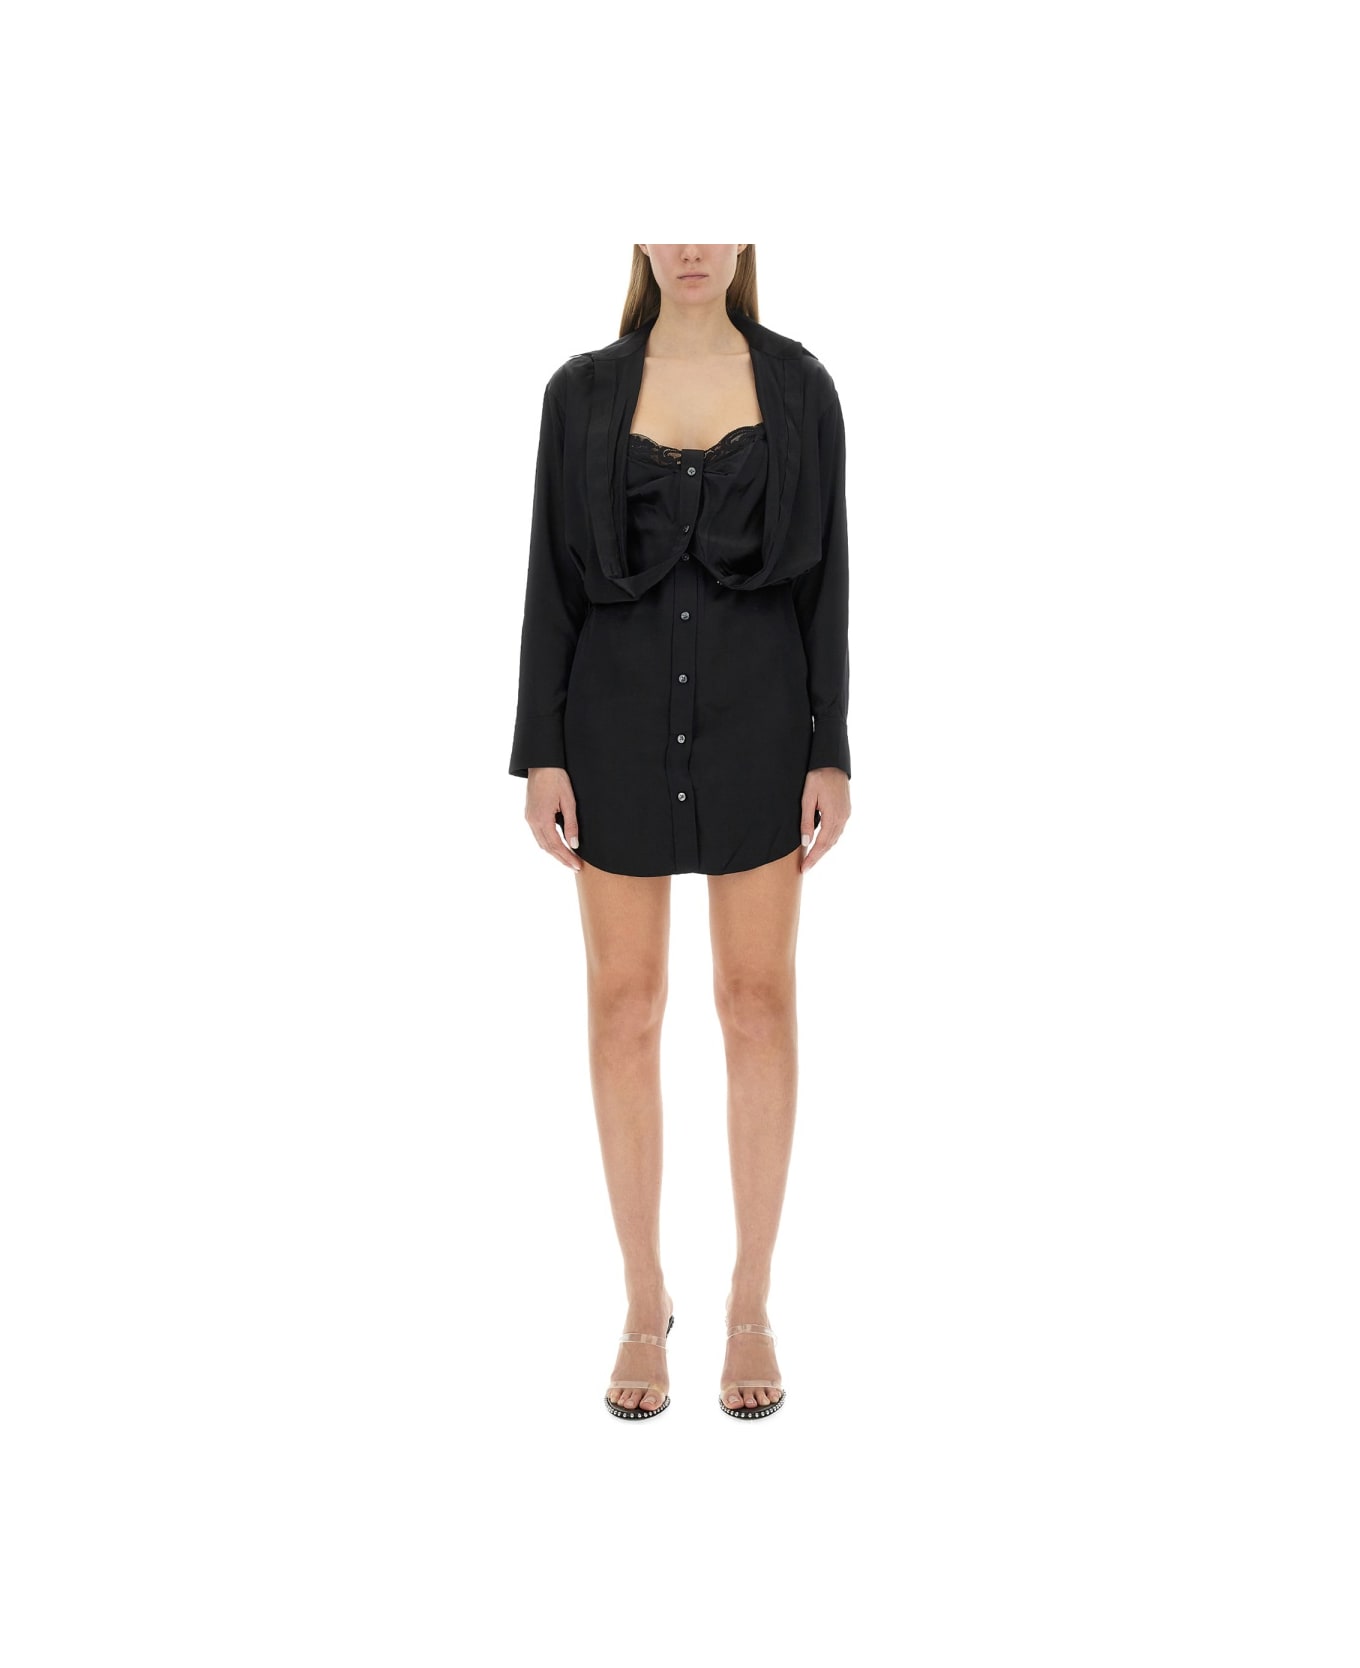 T by Alexander Wang Layered Chemisier Dress - BLACK